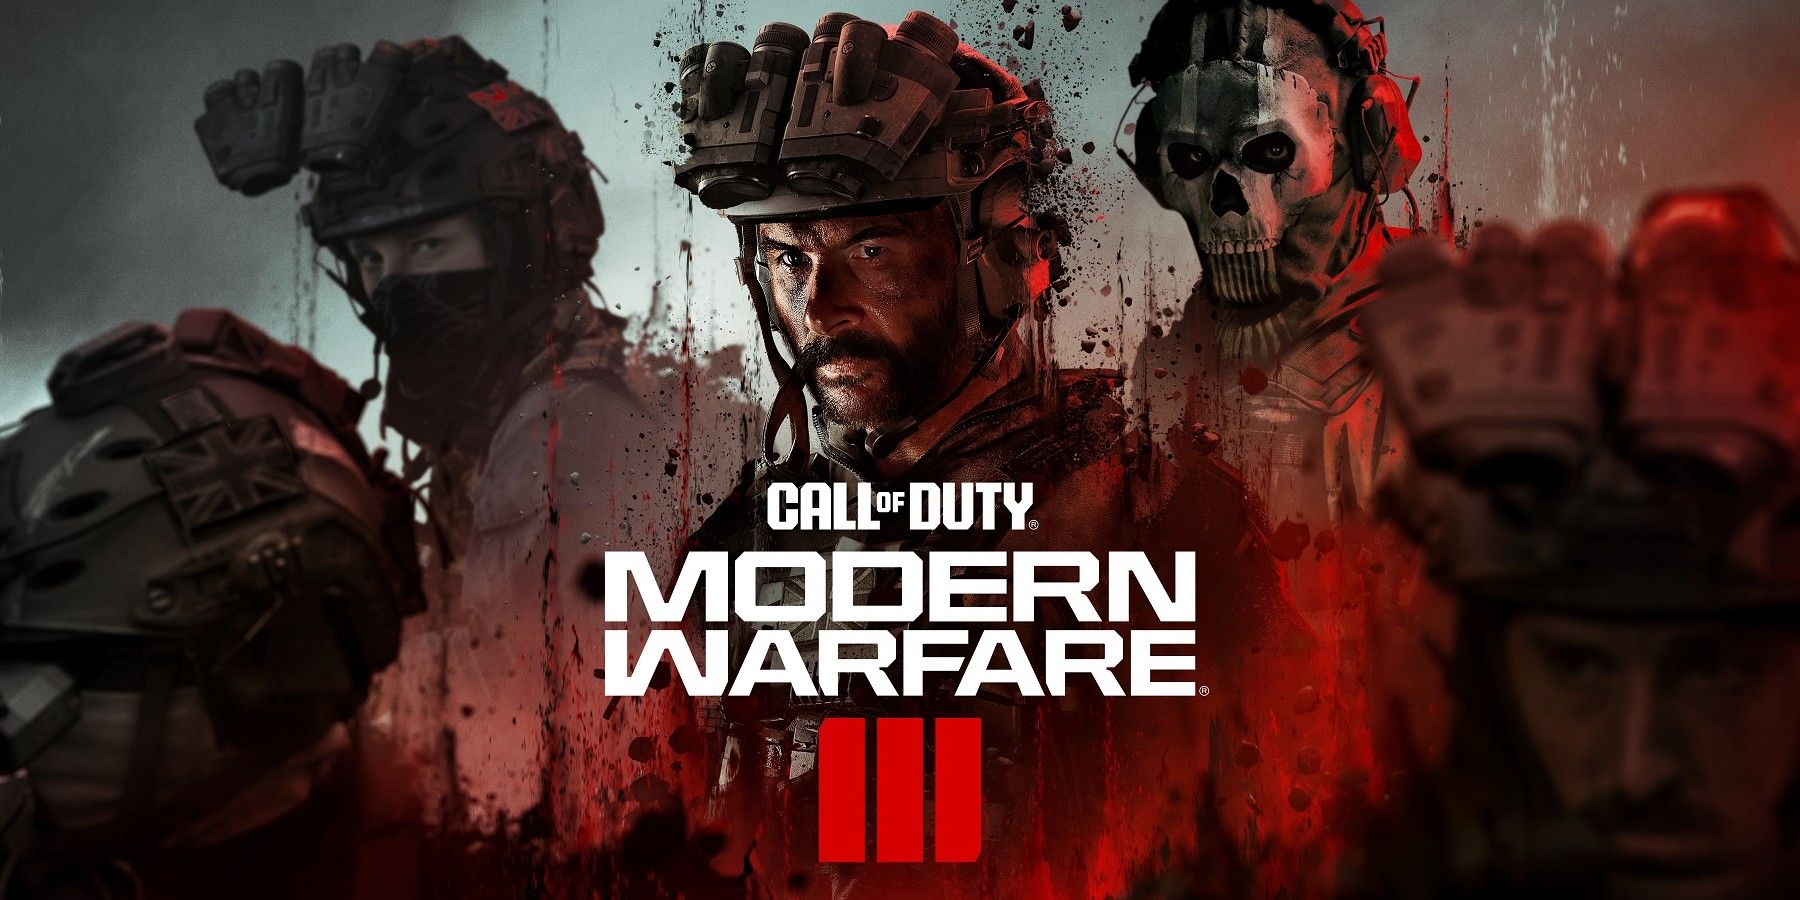 How long is the Modern Warfare 3 (MW3) campaign?